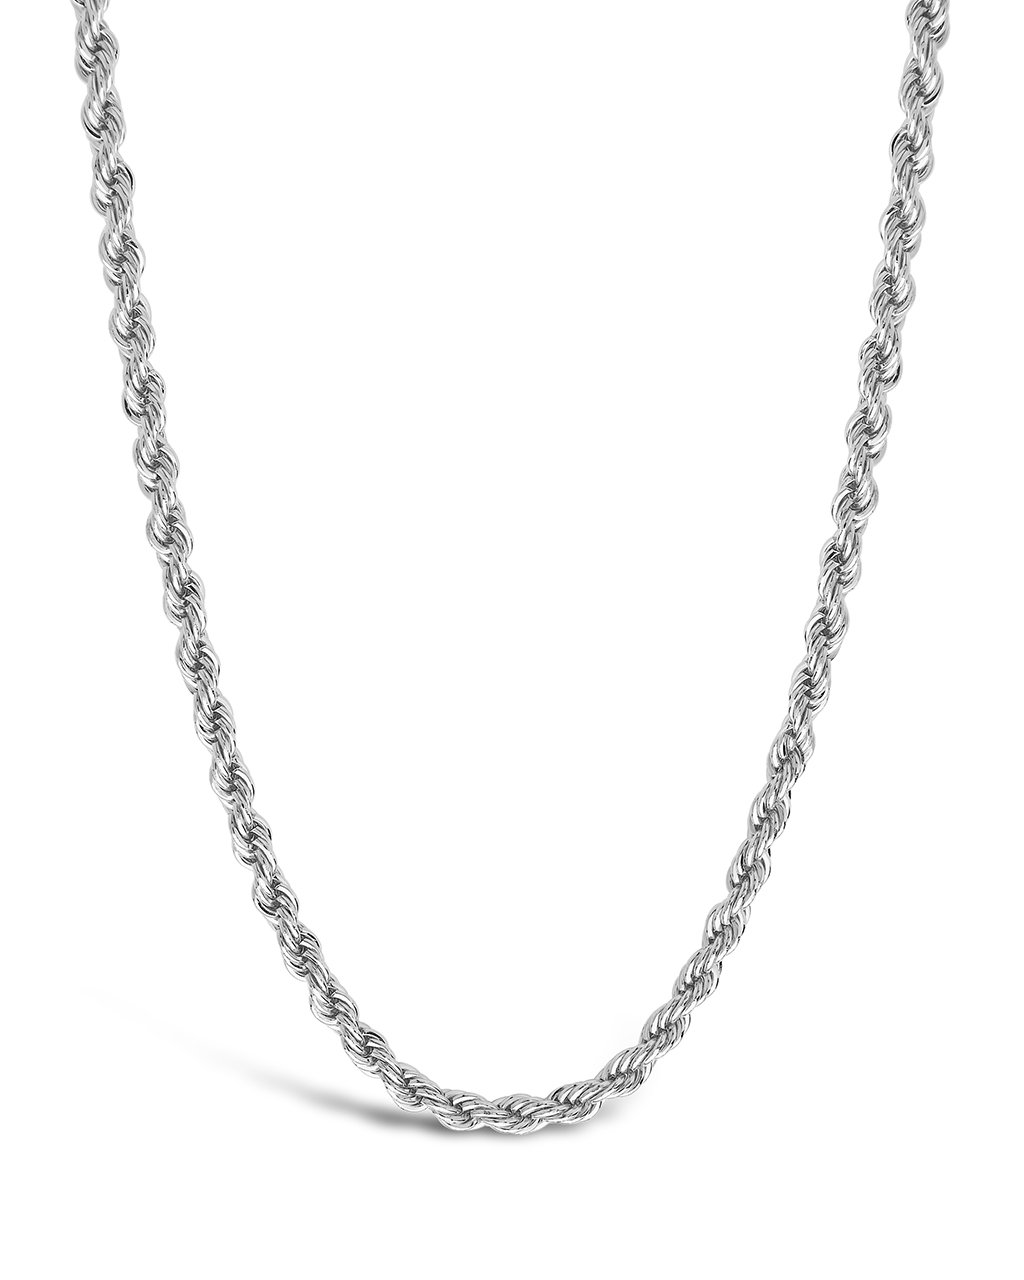 Rope Braided Twist Chain Necklace Sterling Forever Silver 